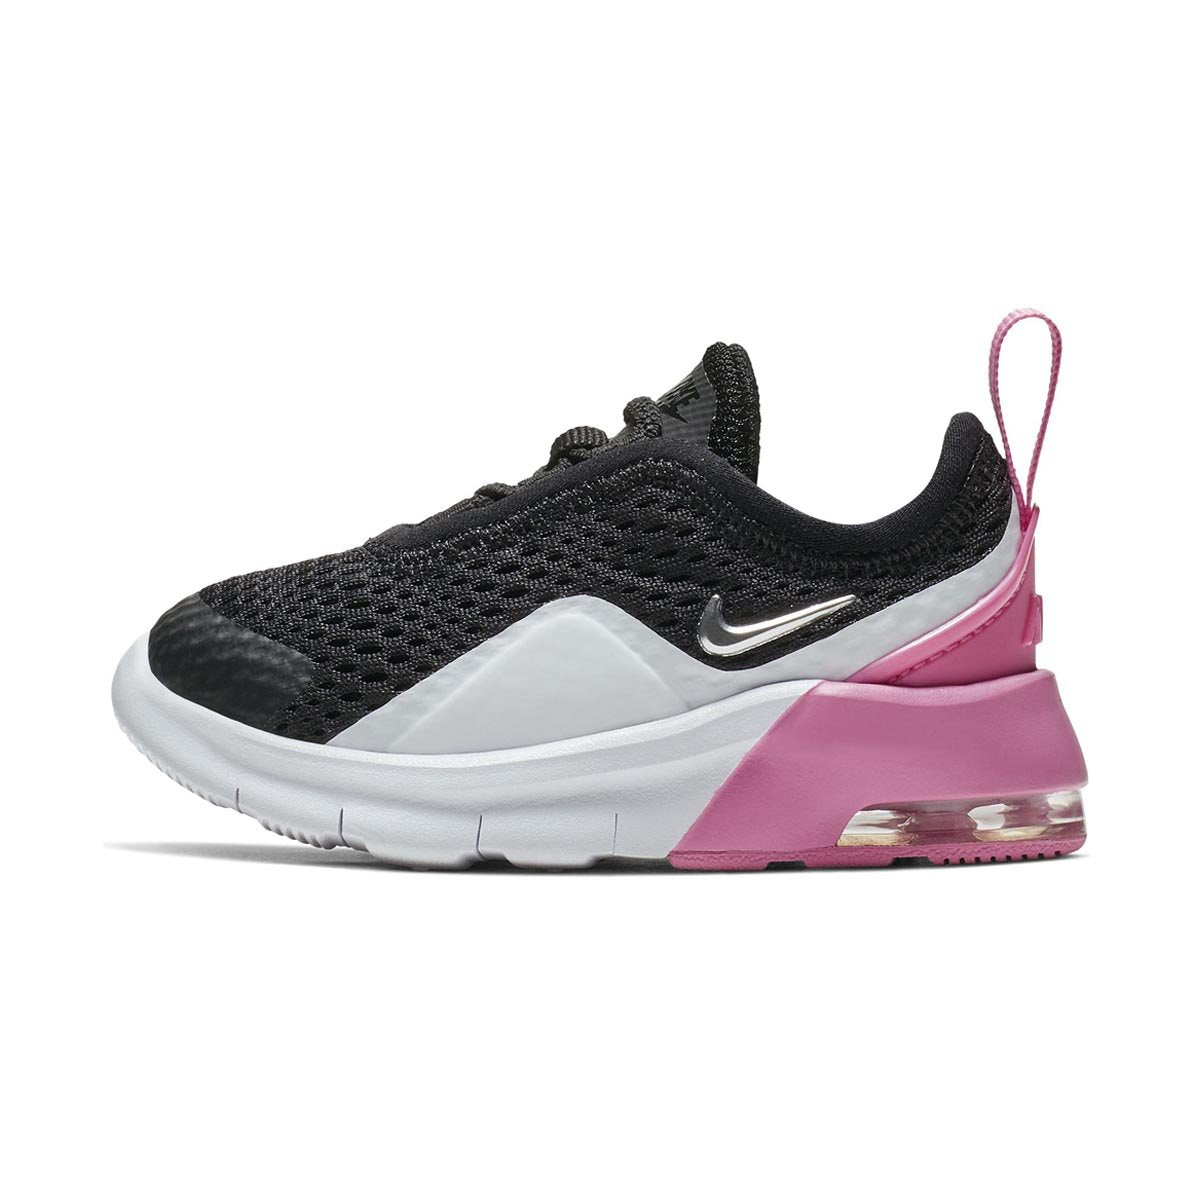 Nike Air Max Motion 2 Infant/Toddler Shoes